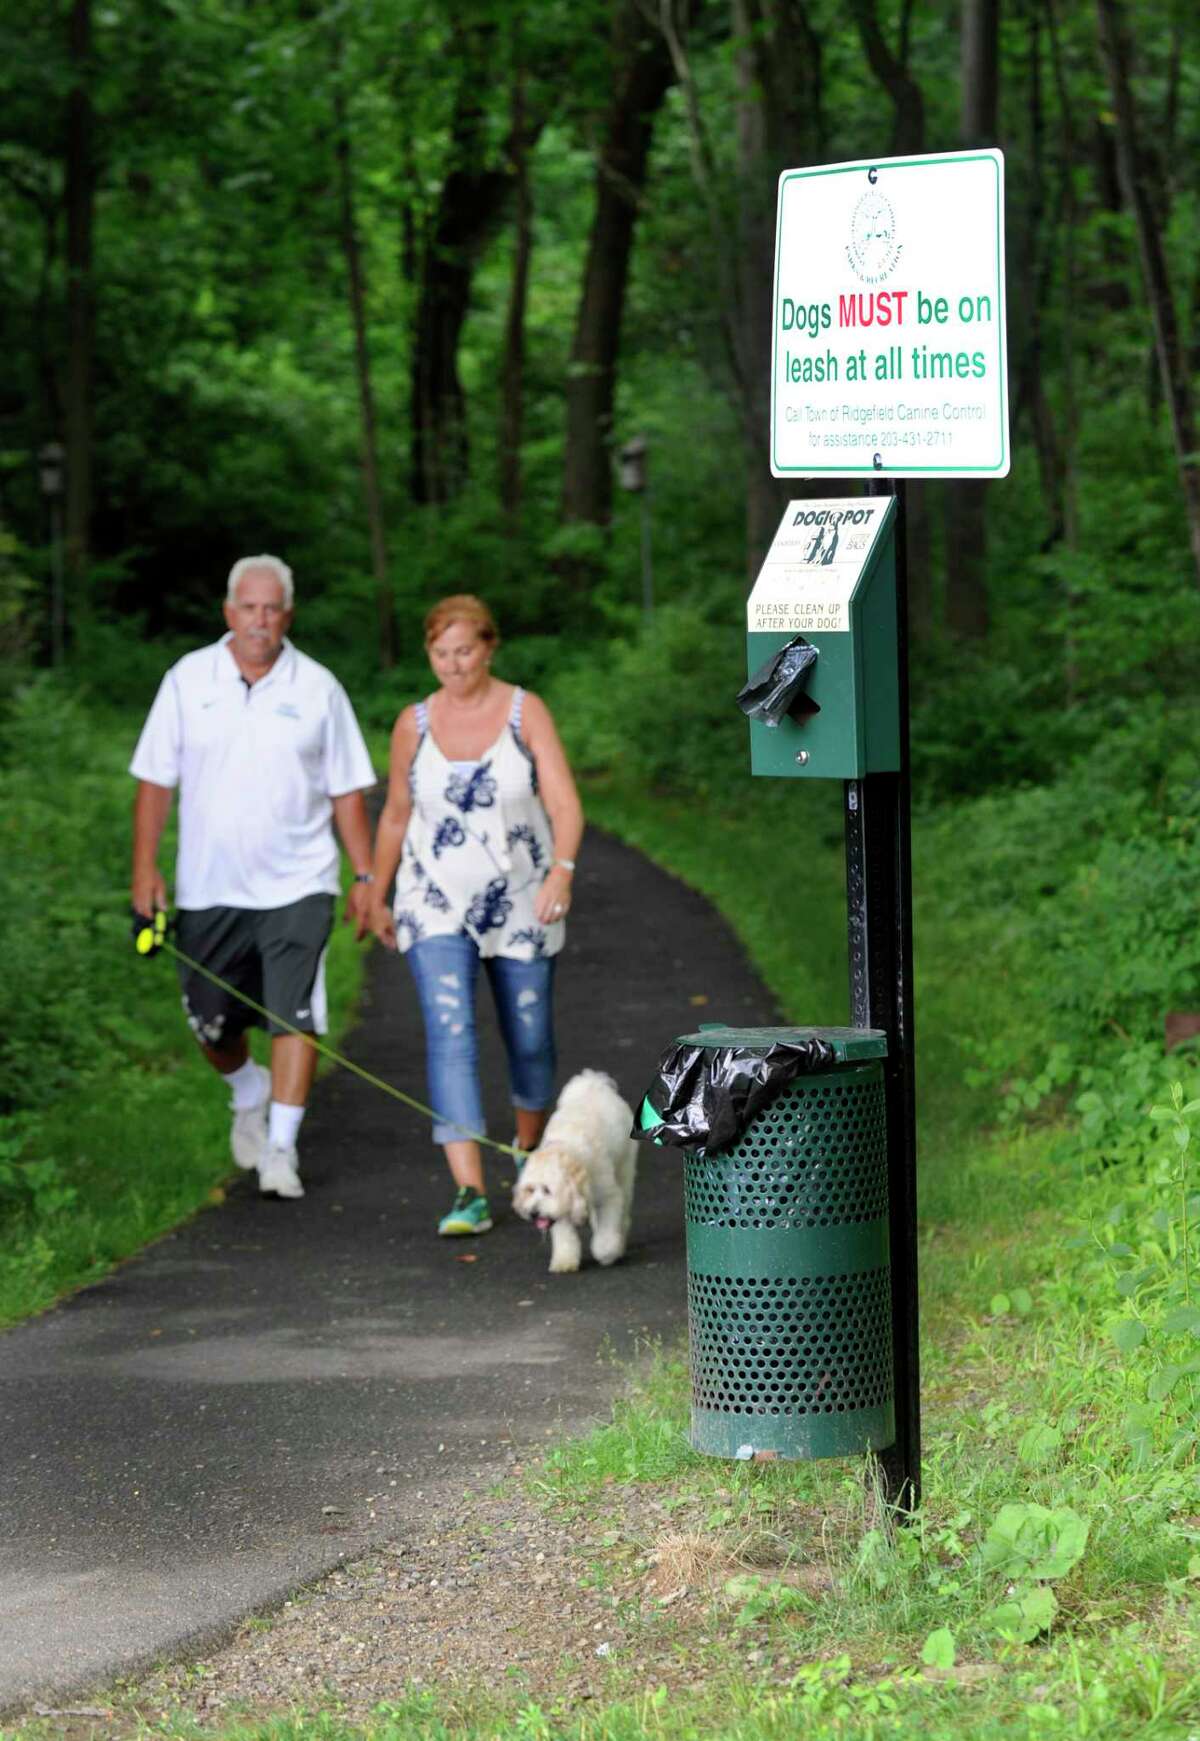 Residents Robert and Julia Howard walk their dog past a receptacle at the Ridgefield Recreational Center. Taken July 11, 2017, in Ridgefield, Conn.